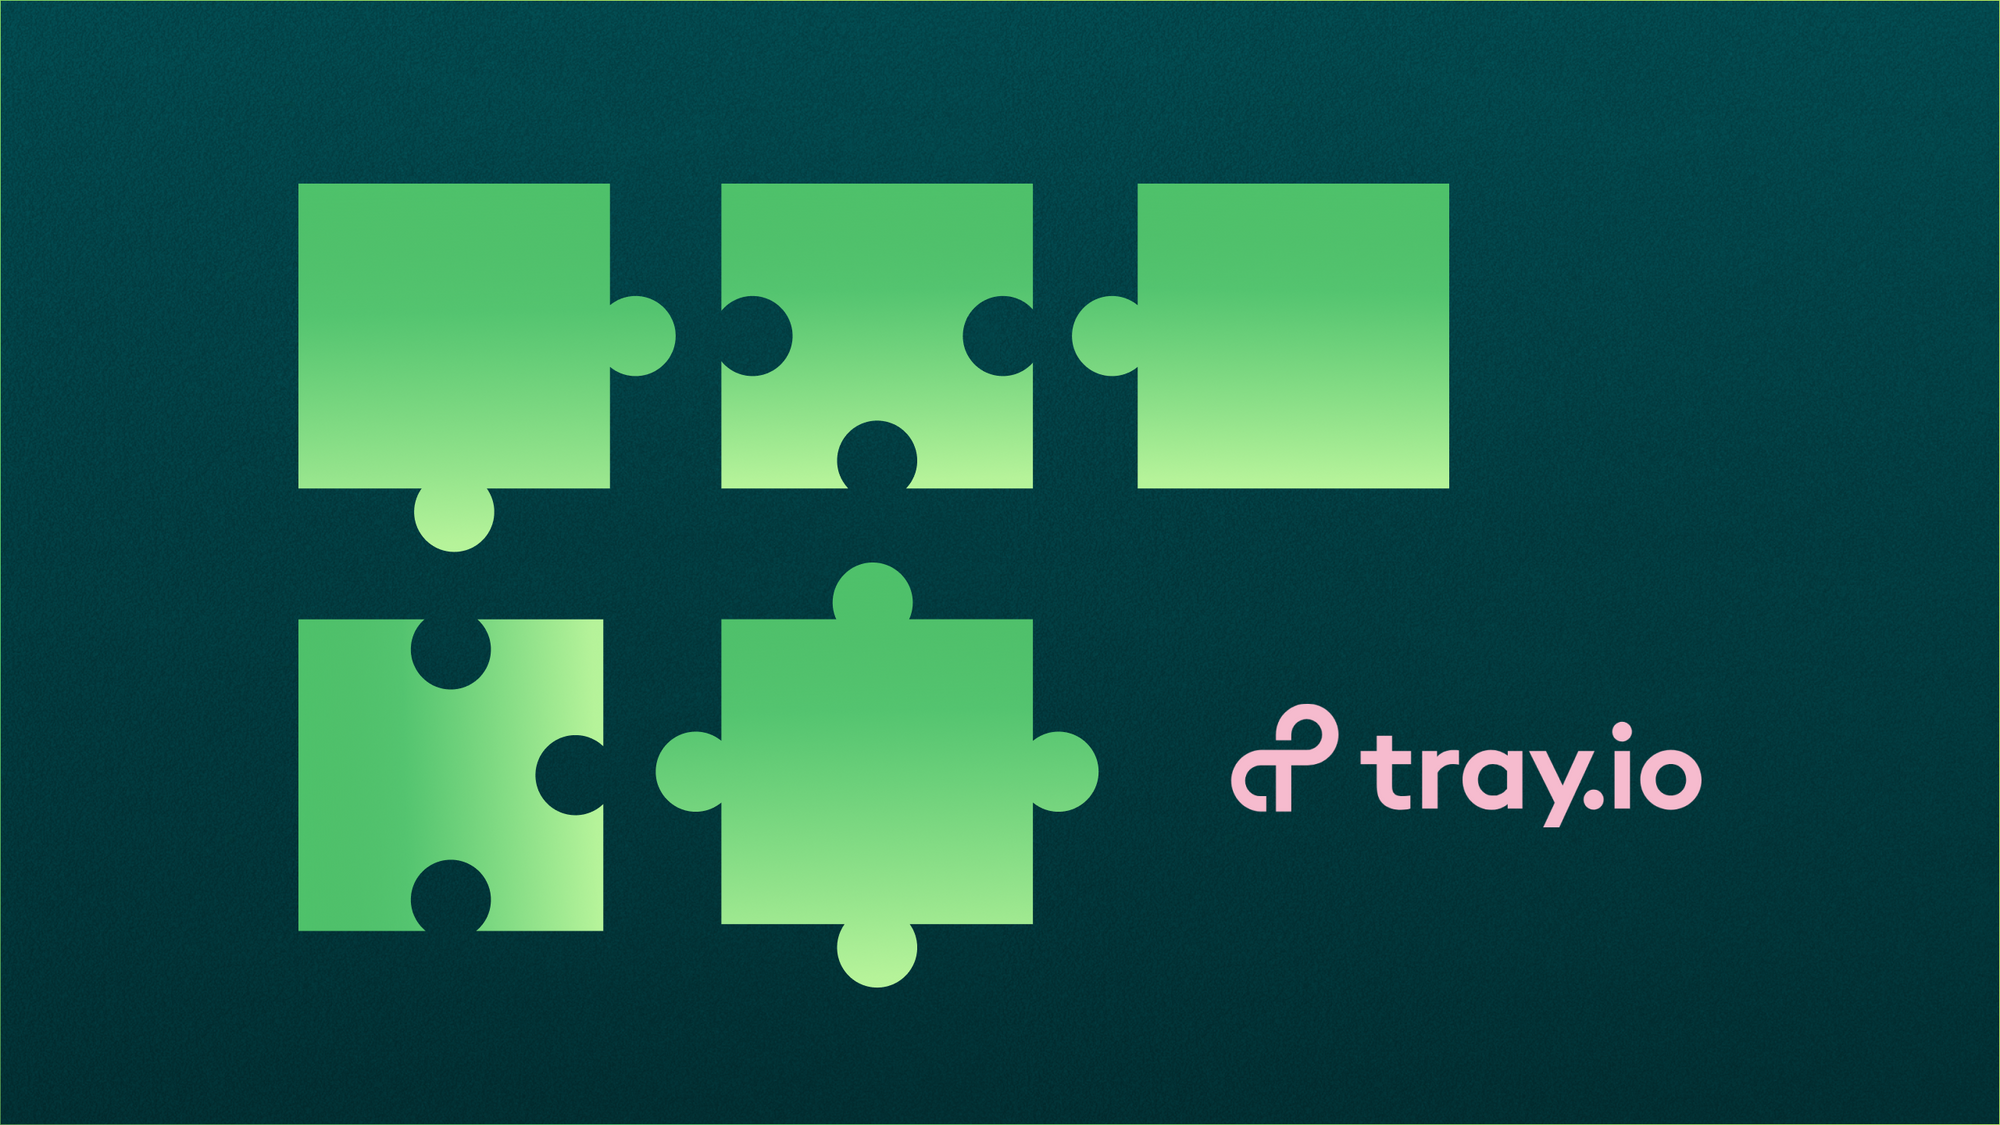 The Top 5 Most Useful Tray.io Integrations & Recipes.